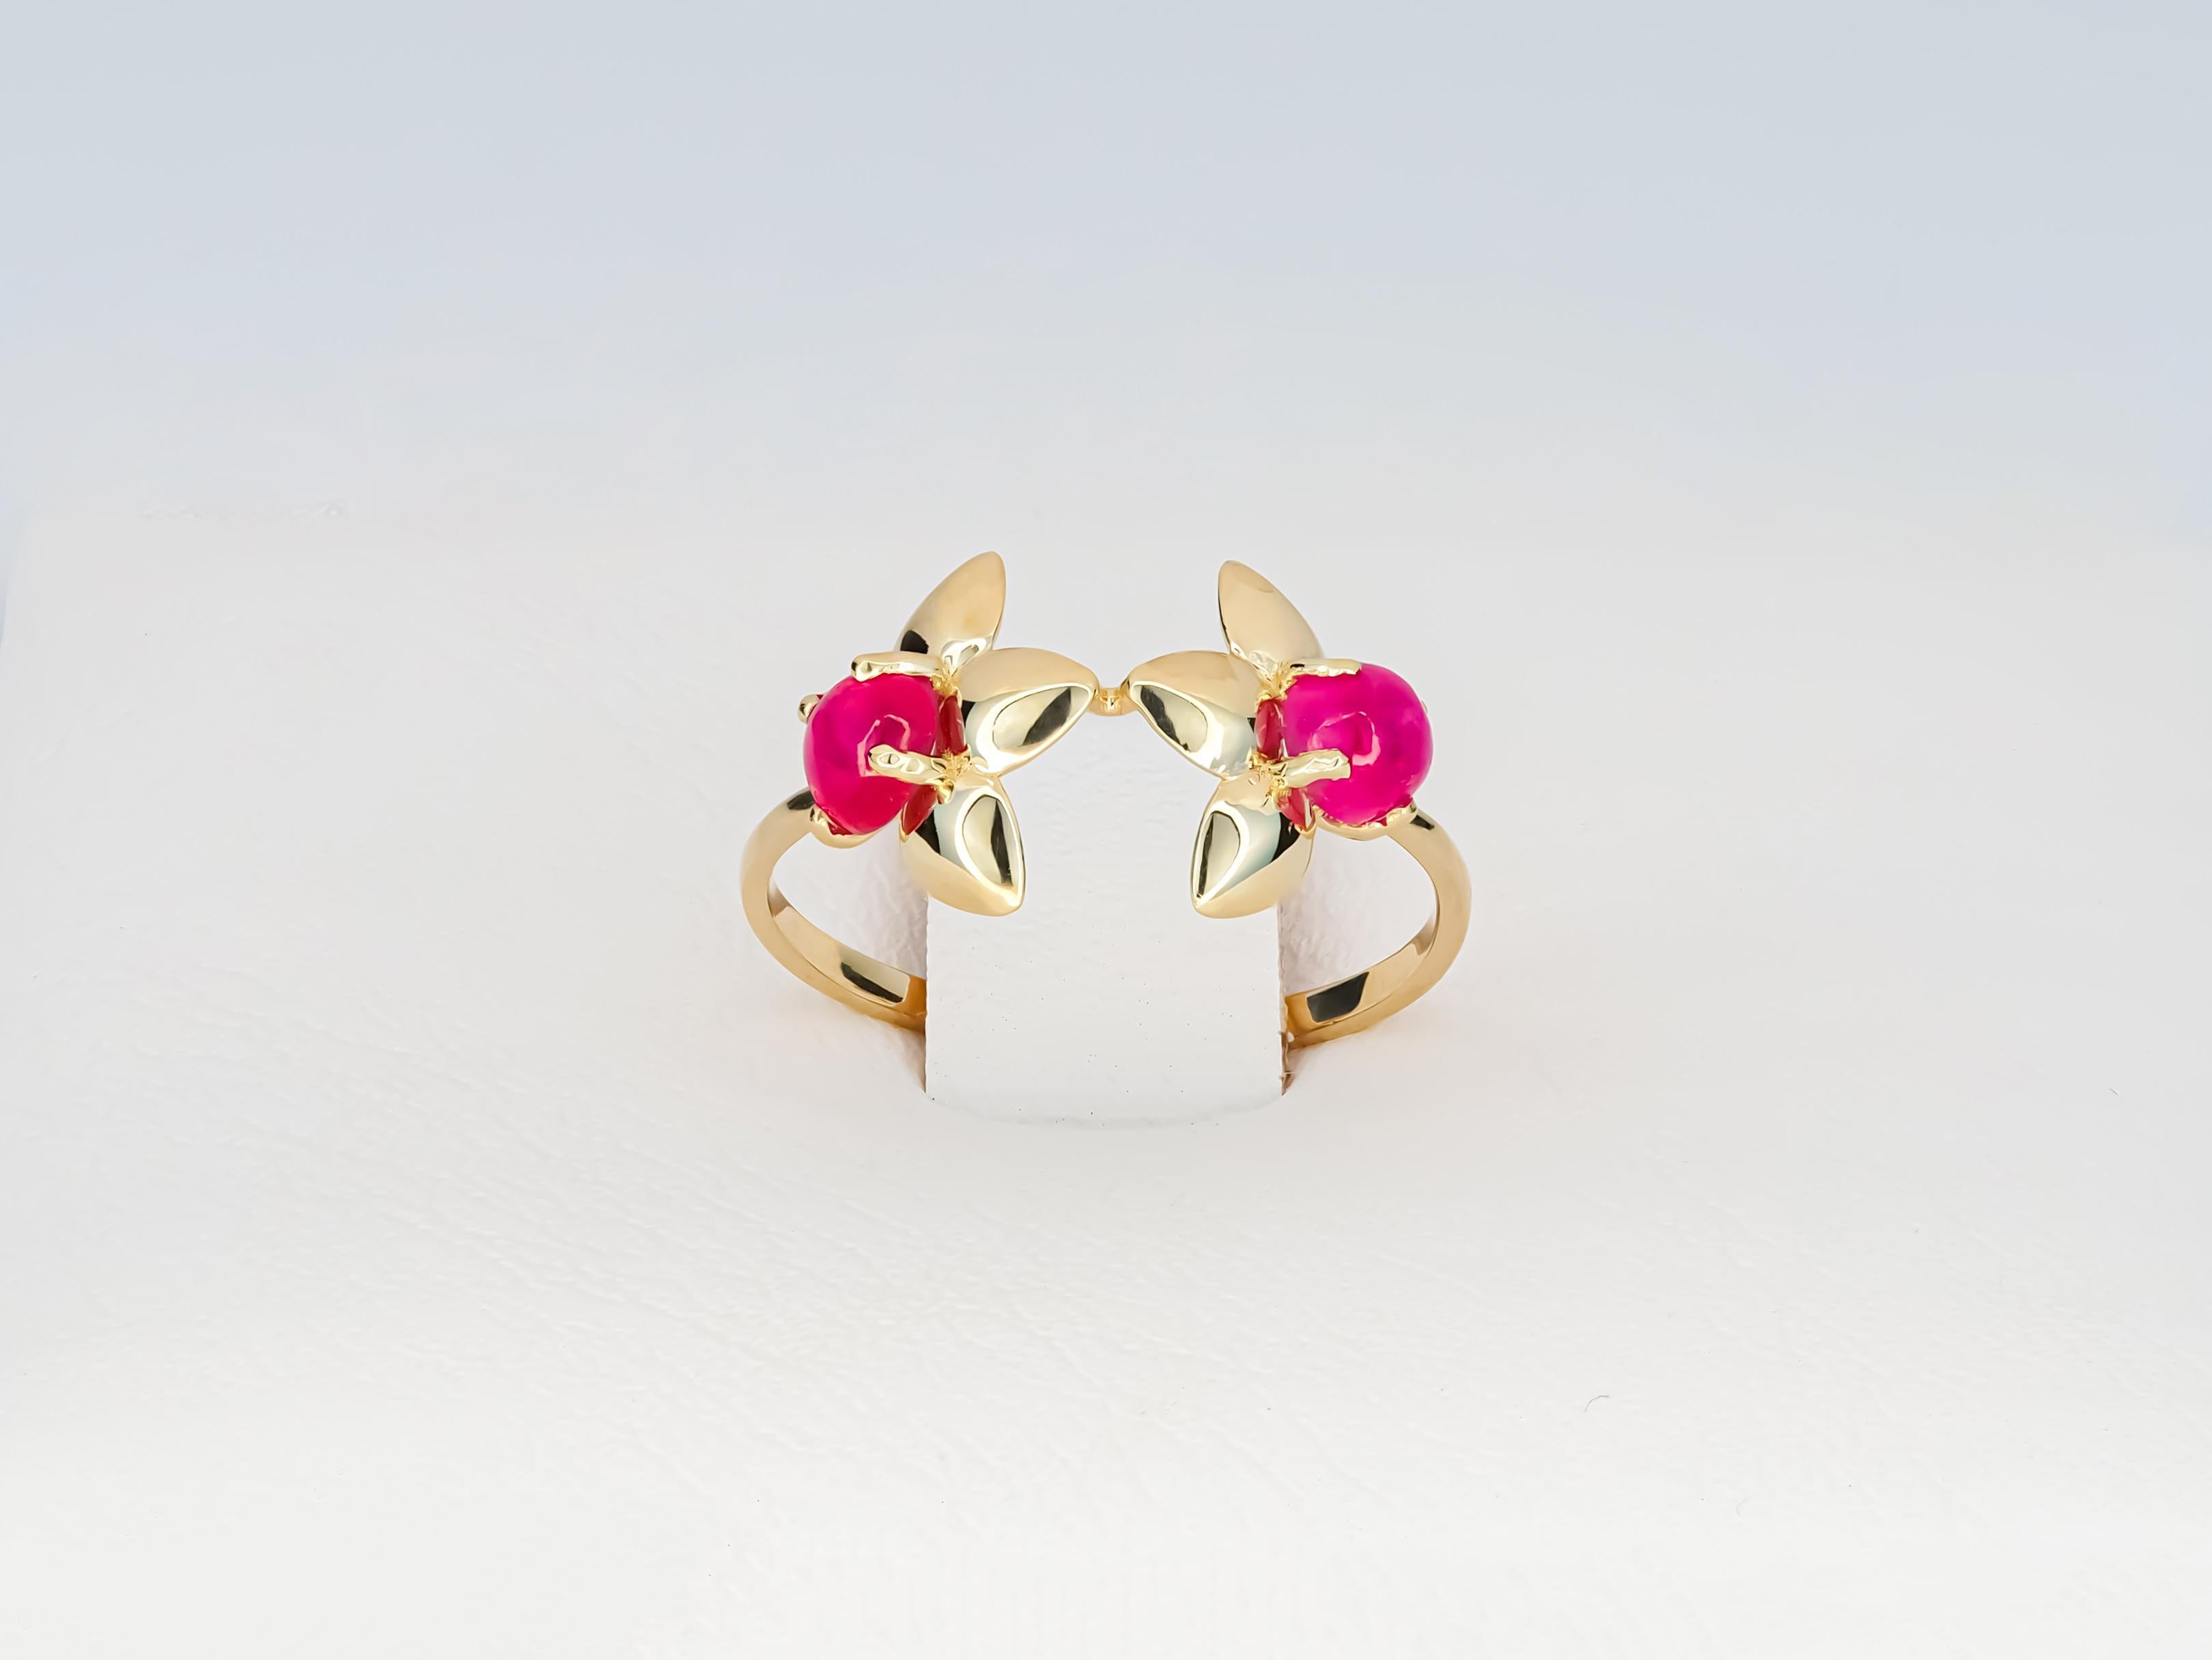 Women's 14 Karat Gold Ring with 2 Rubies, Flower Gold Ring. July birthstone ruby ring